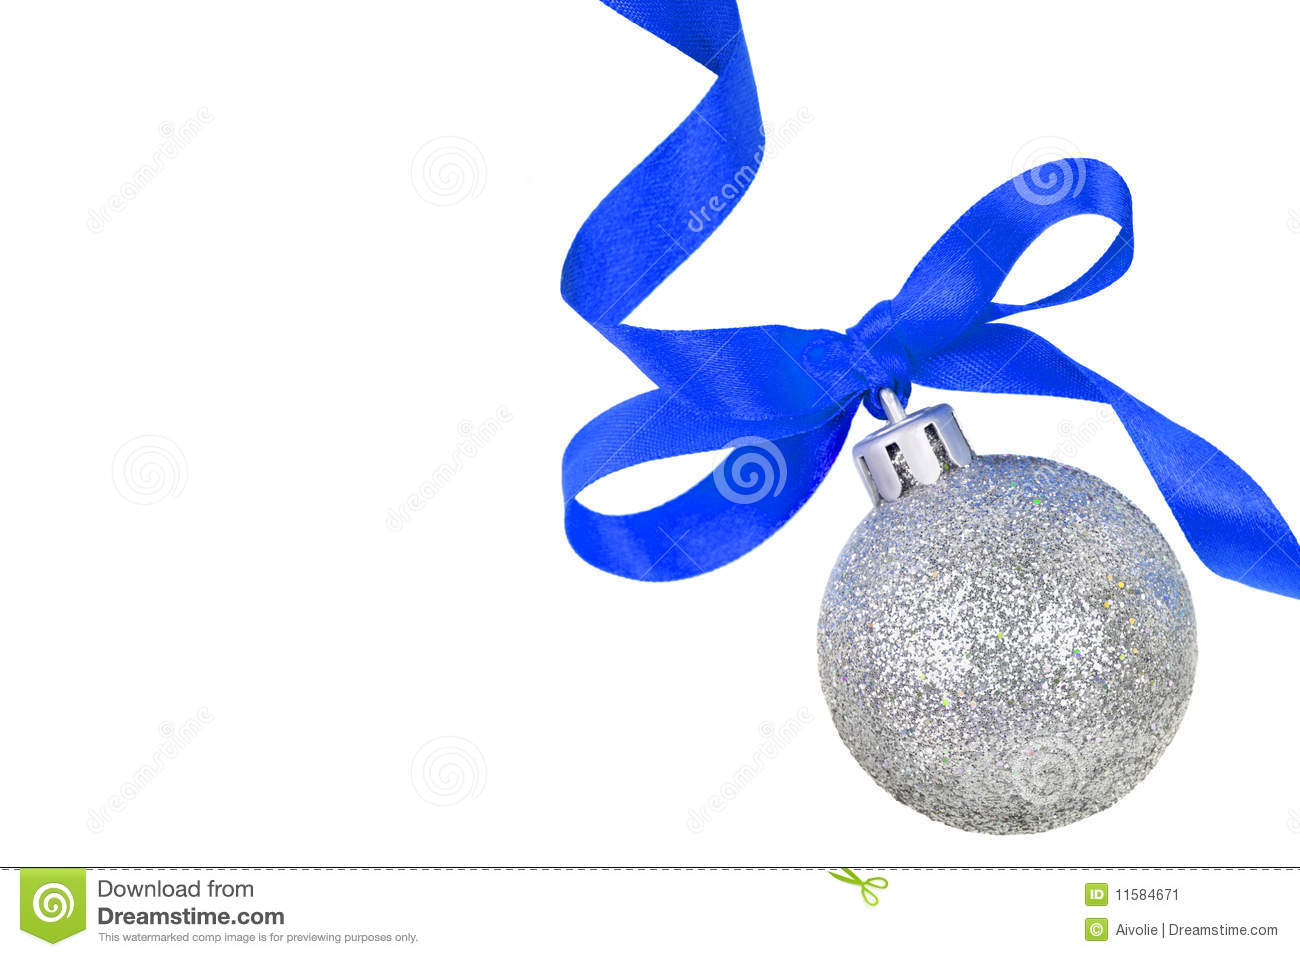 Christmas Silver Ball With Blue Ribbon Stock Image   Image  11584671